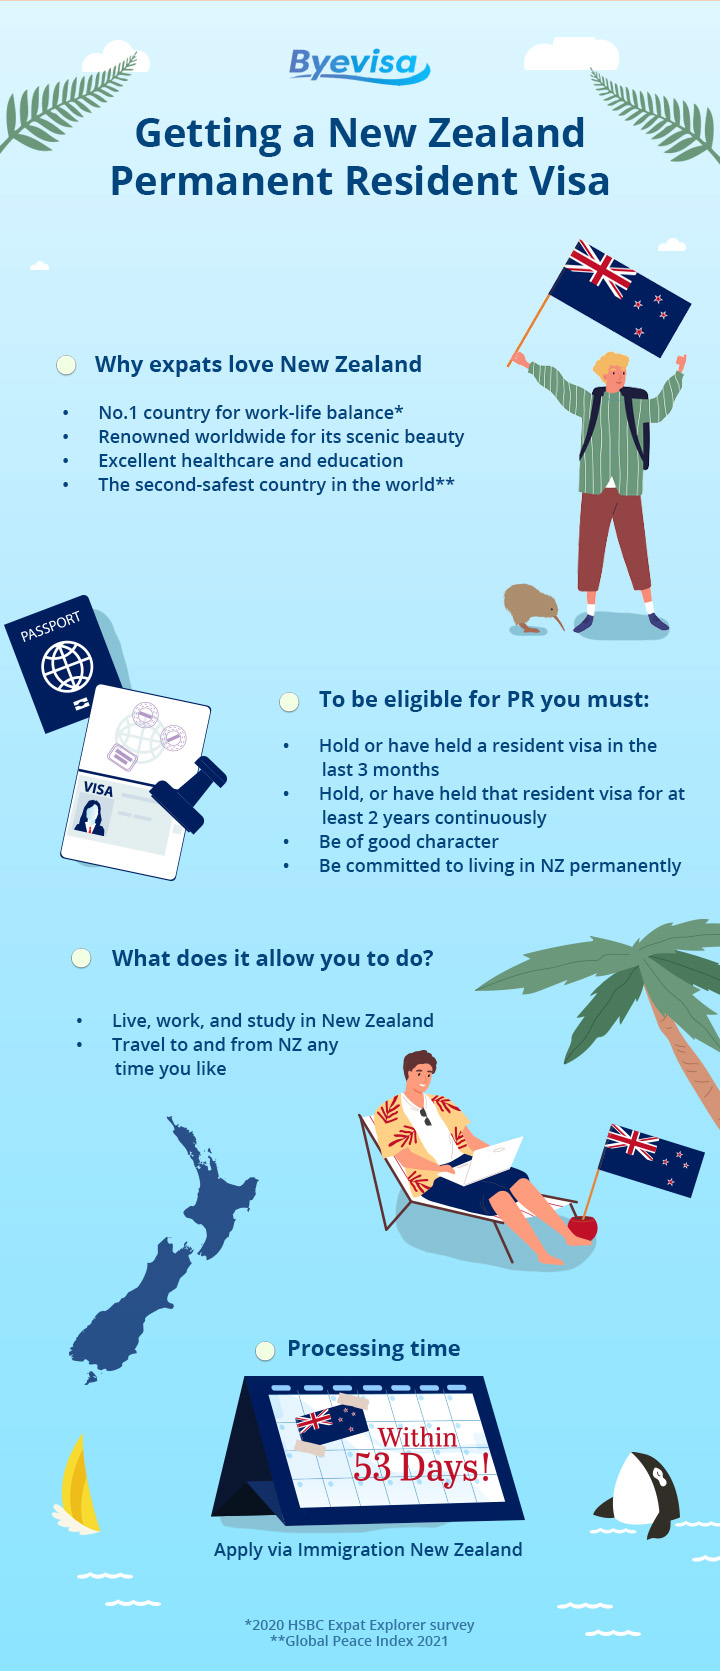 Is It Easier For Rich People To Become Permanent Residents Of New Zealand Byevisa 2080